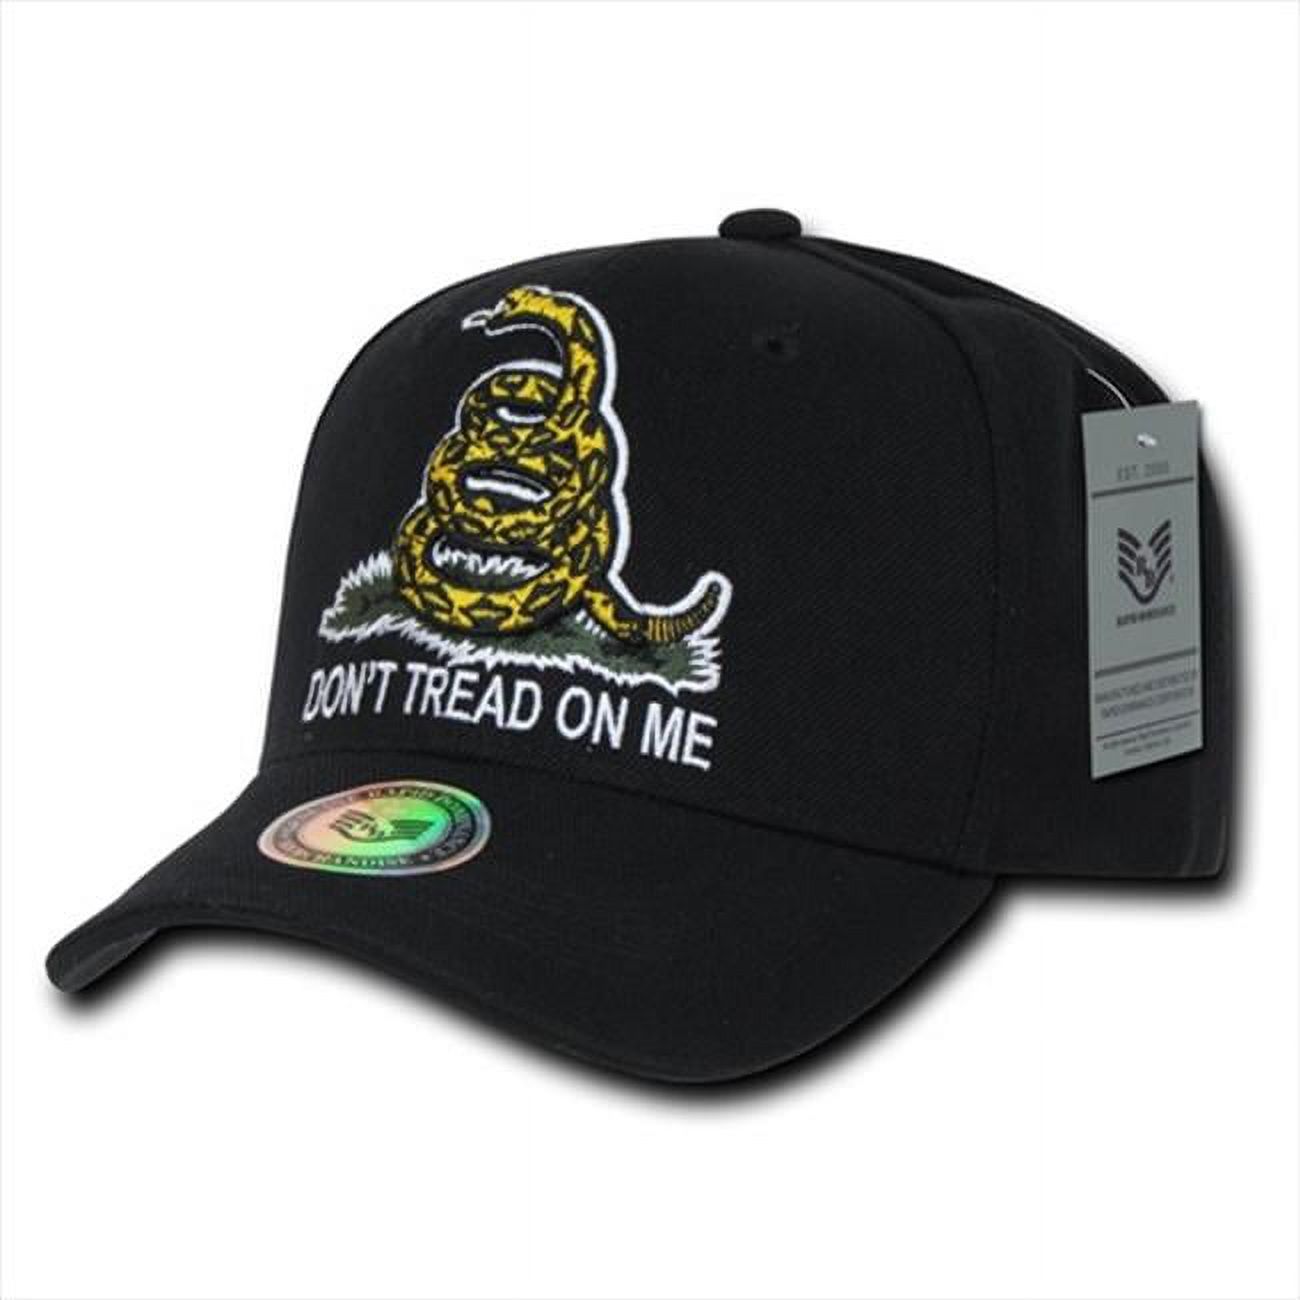 Rapid Dominance A02-BLK Dont Tread On Me Caps - Black - image 1 of 3